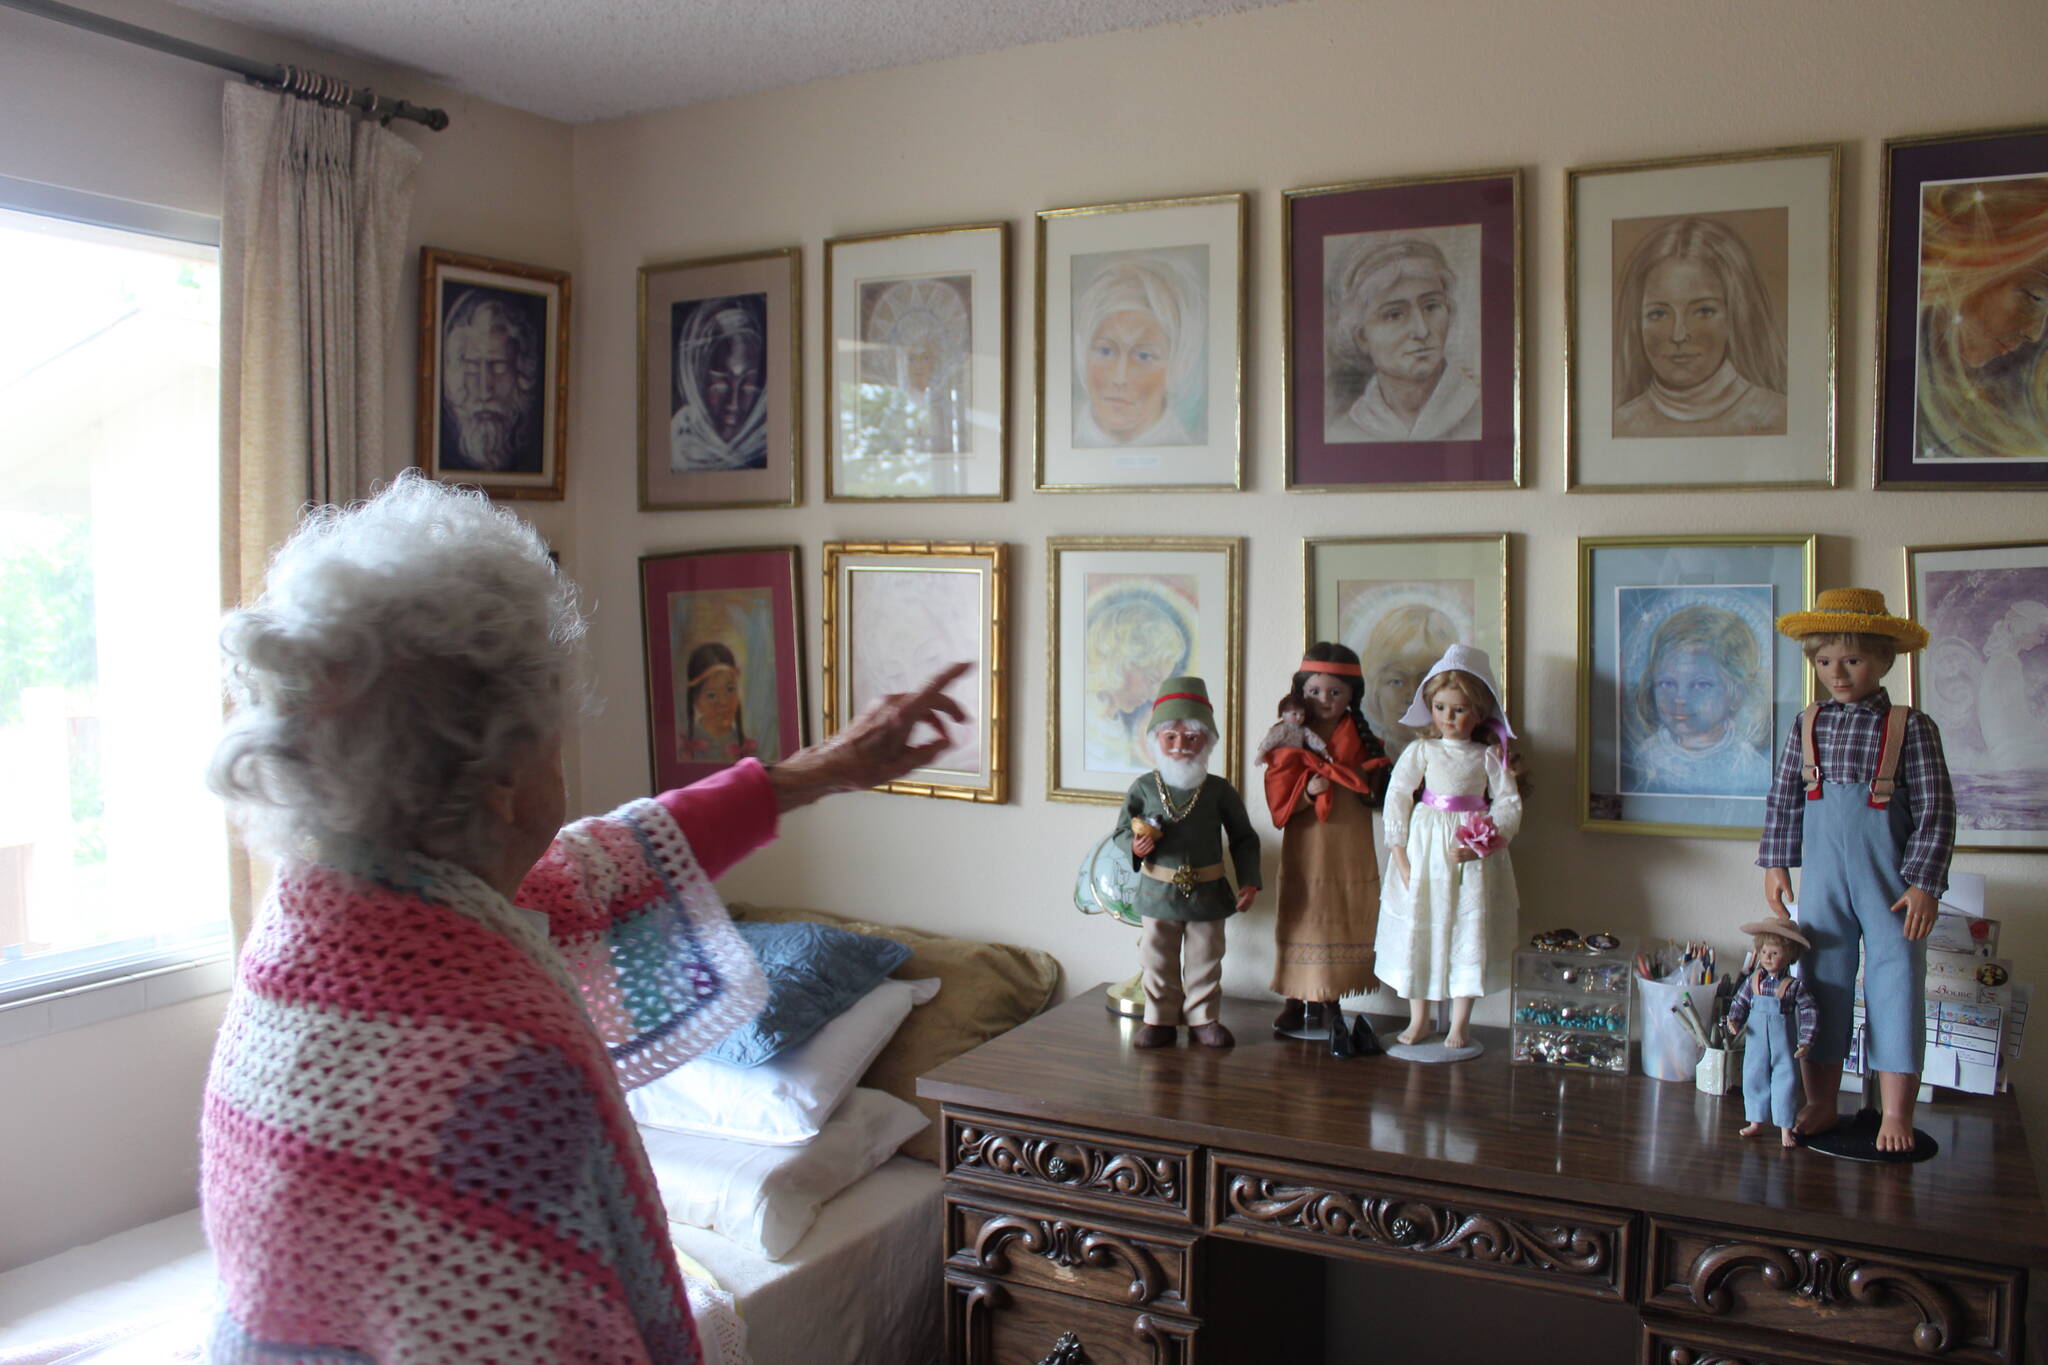 Wearing a shawl she crocheted herself, Irene Graham shows her impressionist art and some of her porcelain dolls that she made herself. Photo by Bailey Jo Josie/Sound Publishing